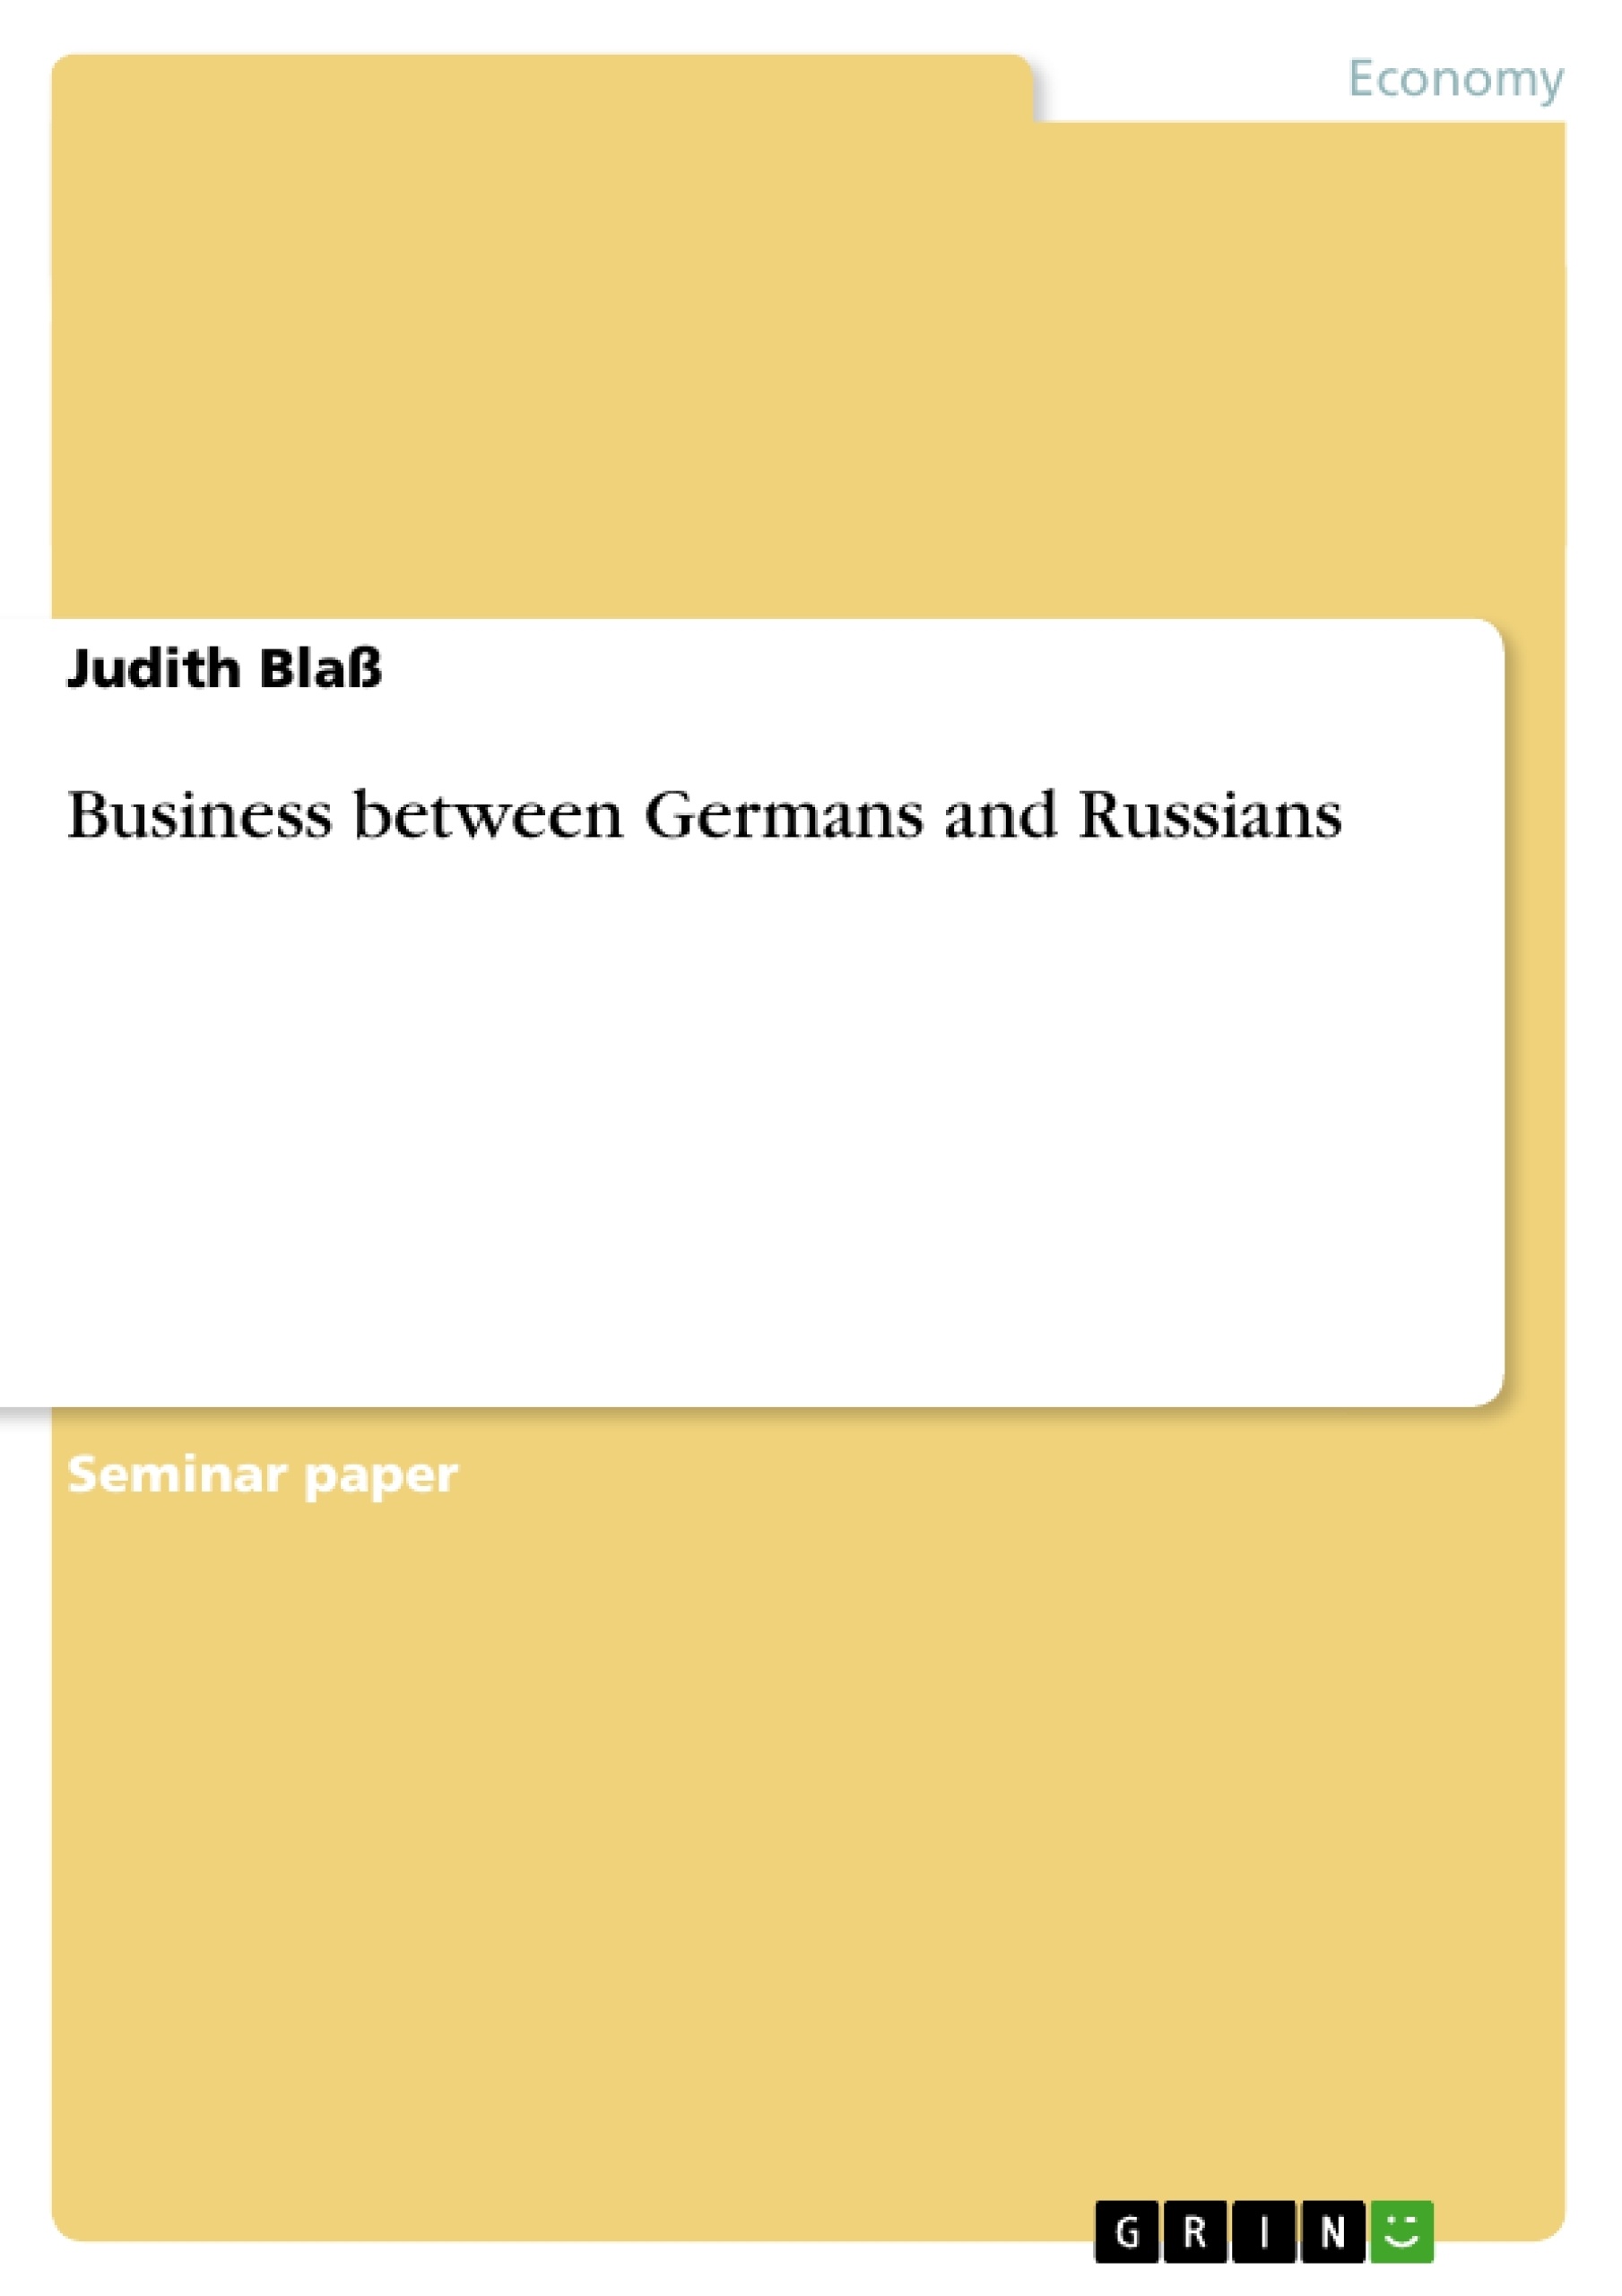 Título: Business between Germans and Russians